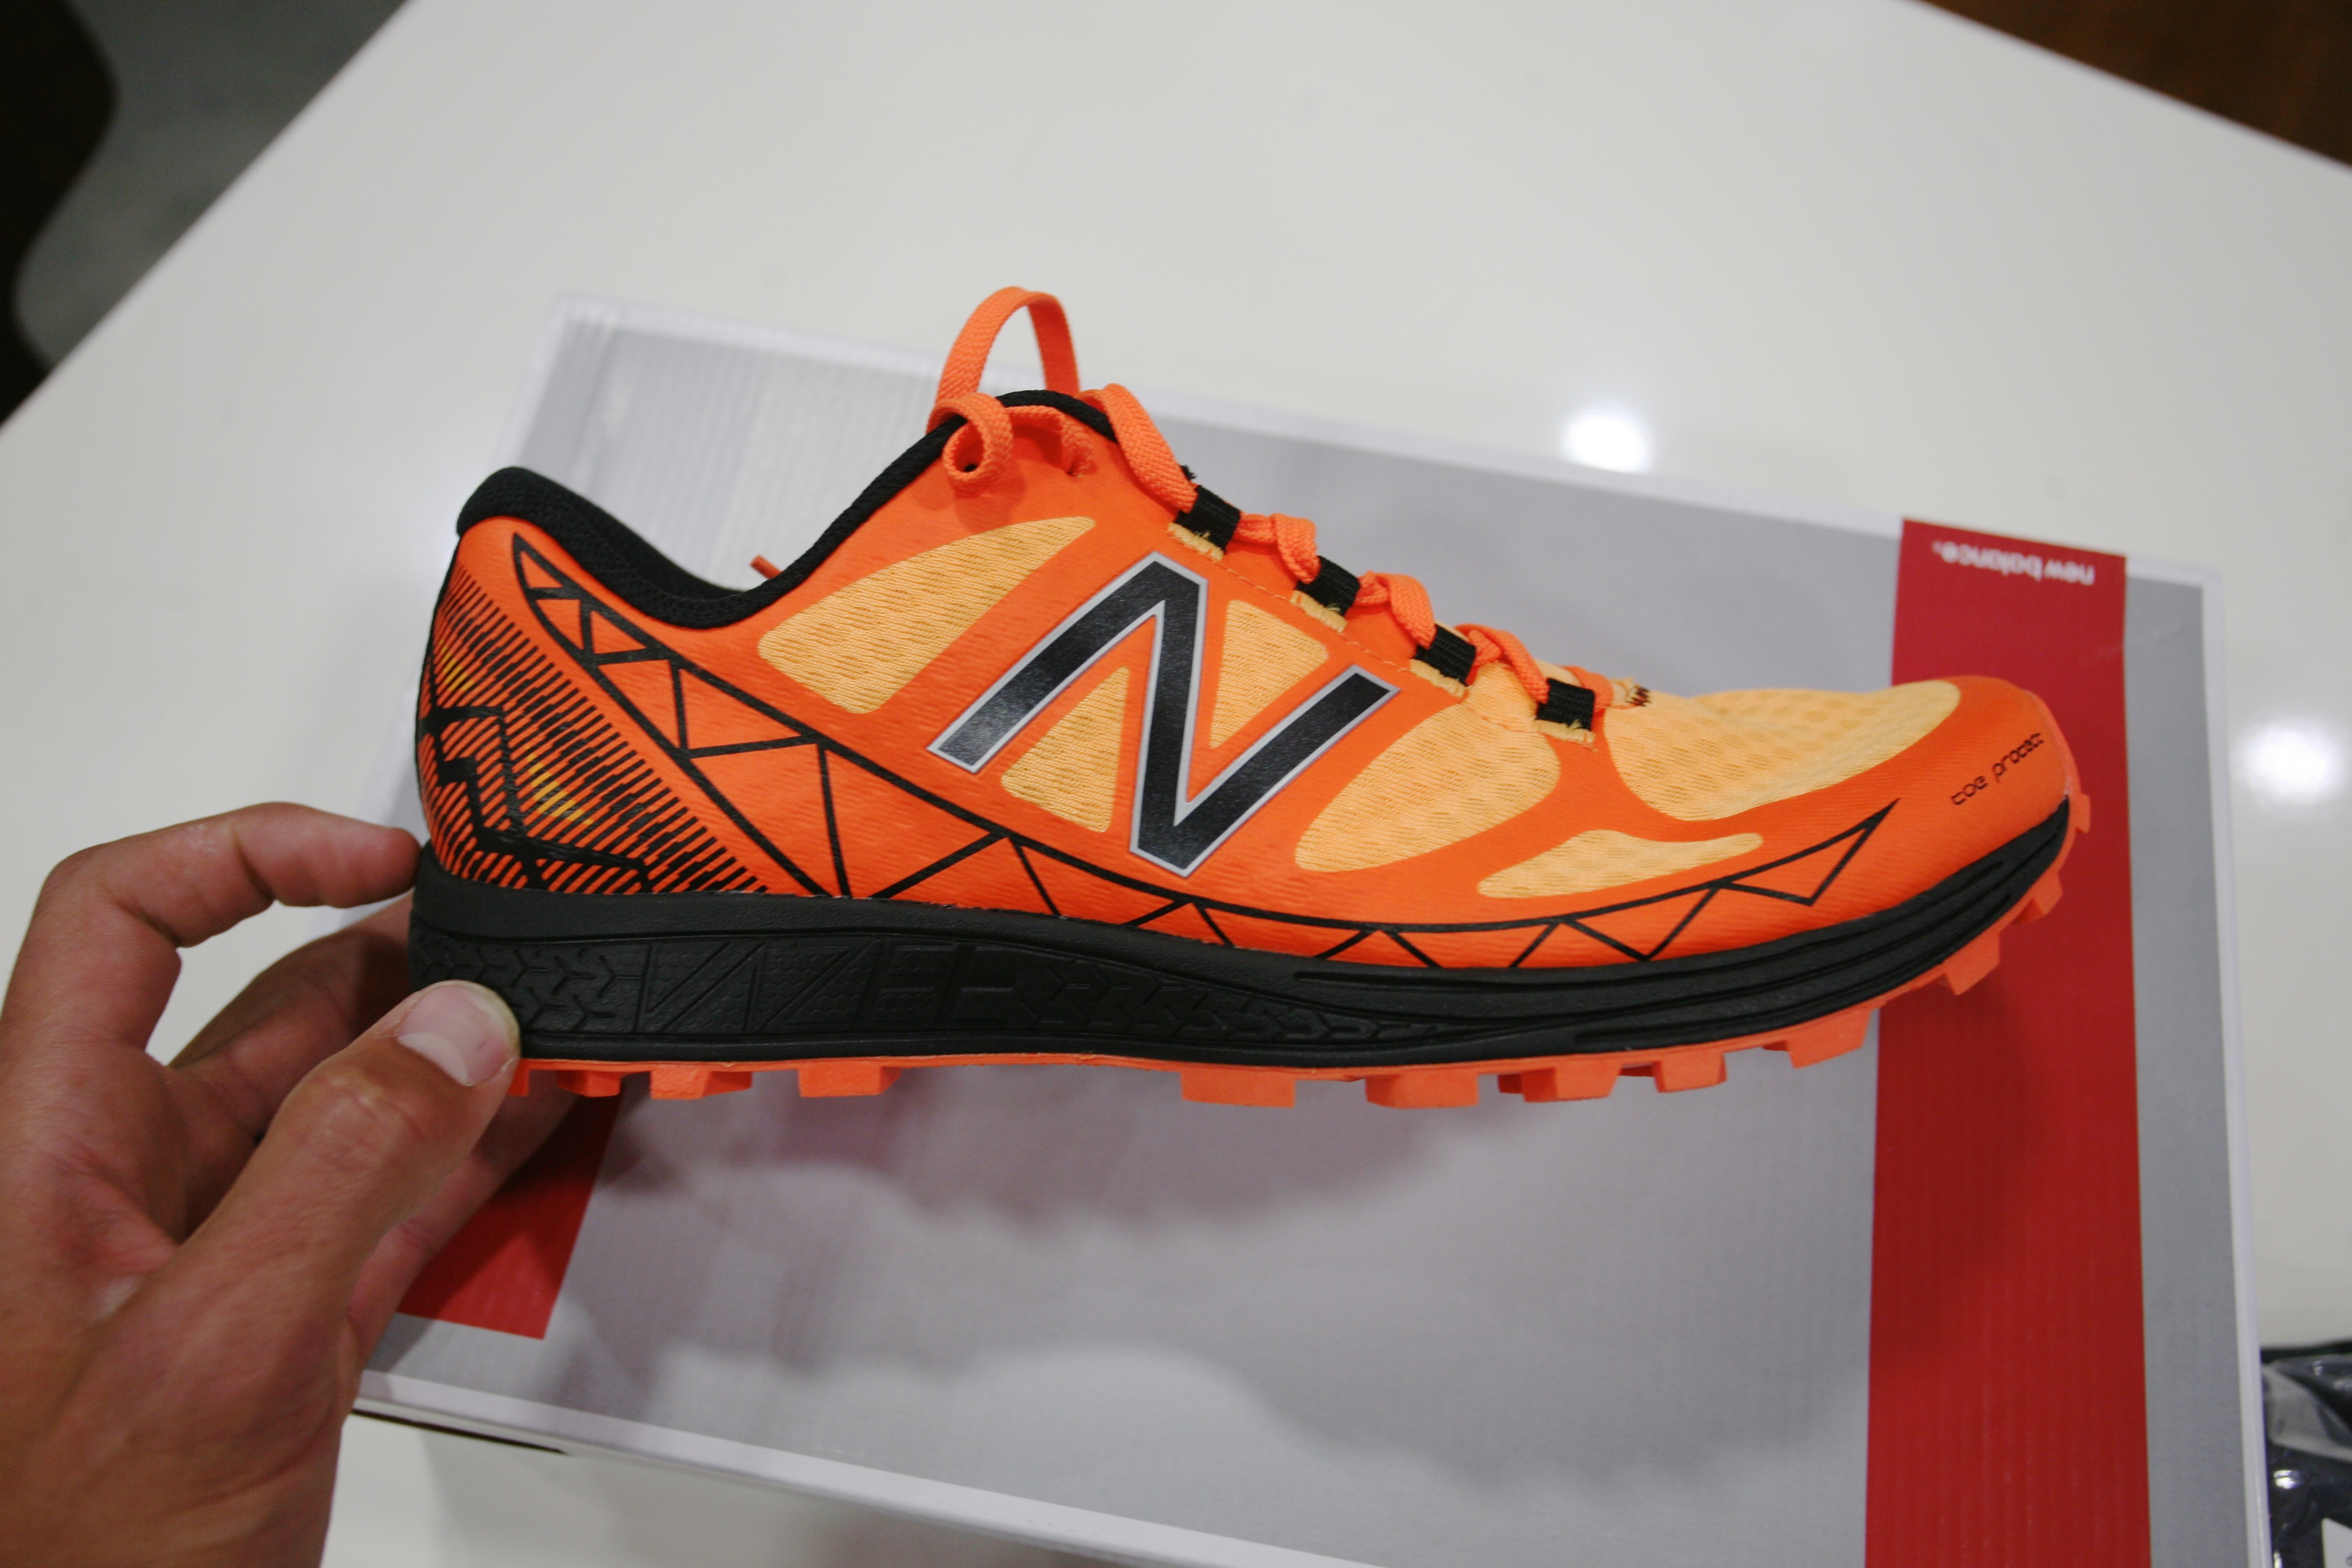 New Shoe Roundup Mountain Running Shoes Coming in 2016